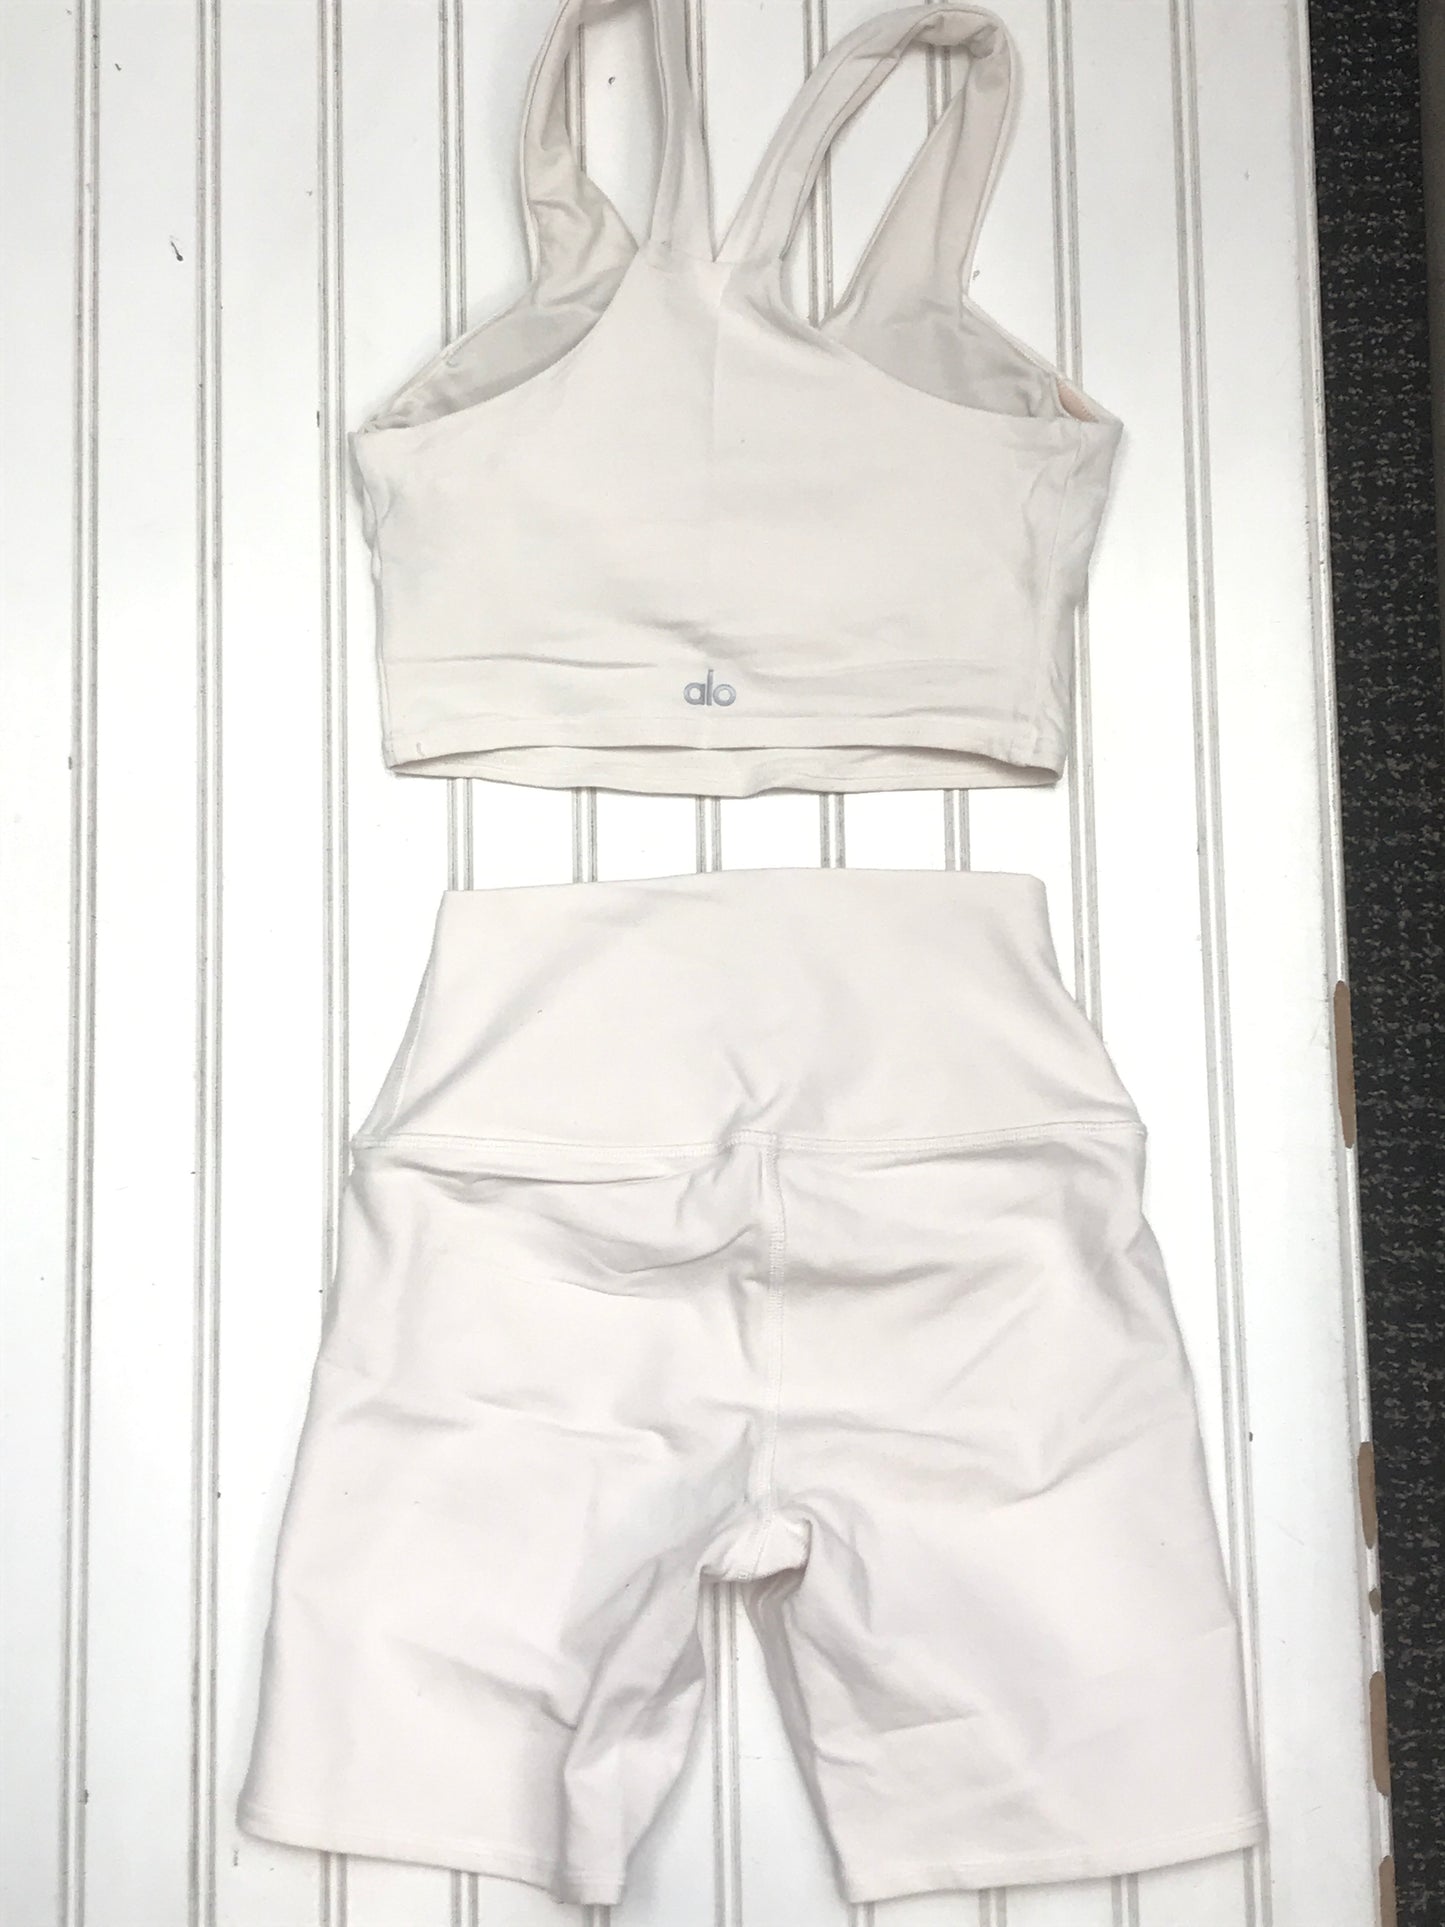 Athletic Shorts 2 Pc By Alo  Size: Xs